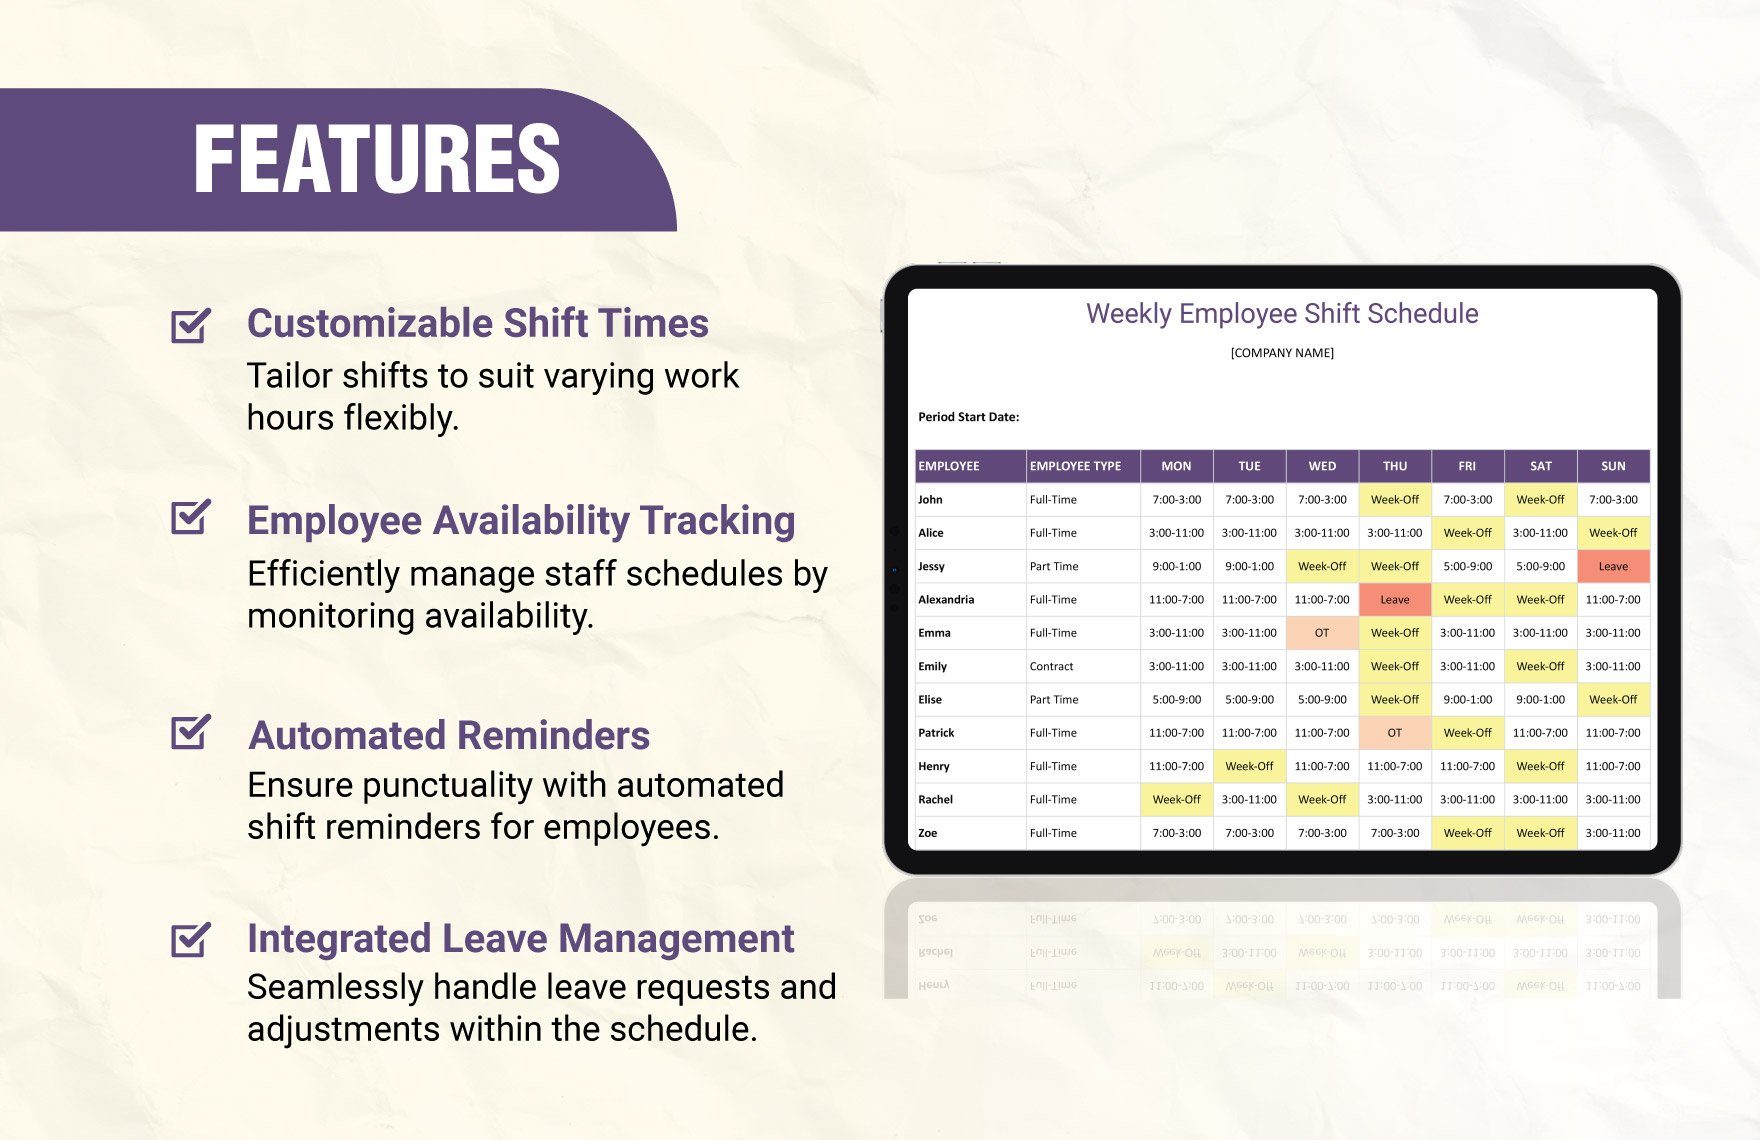 Sample Weekly Employee Shift Schedule Template